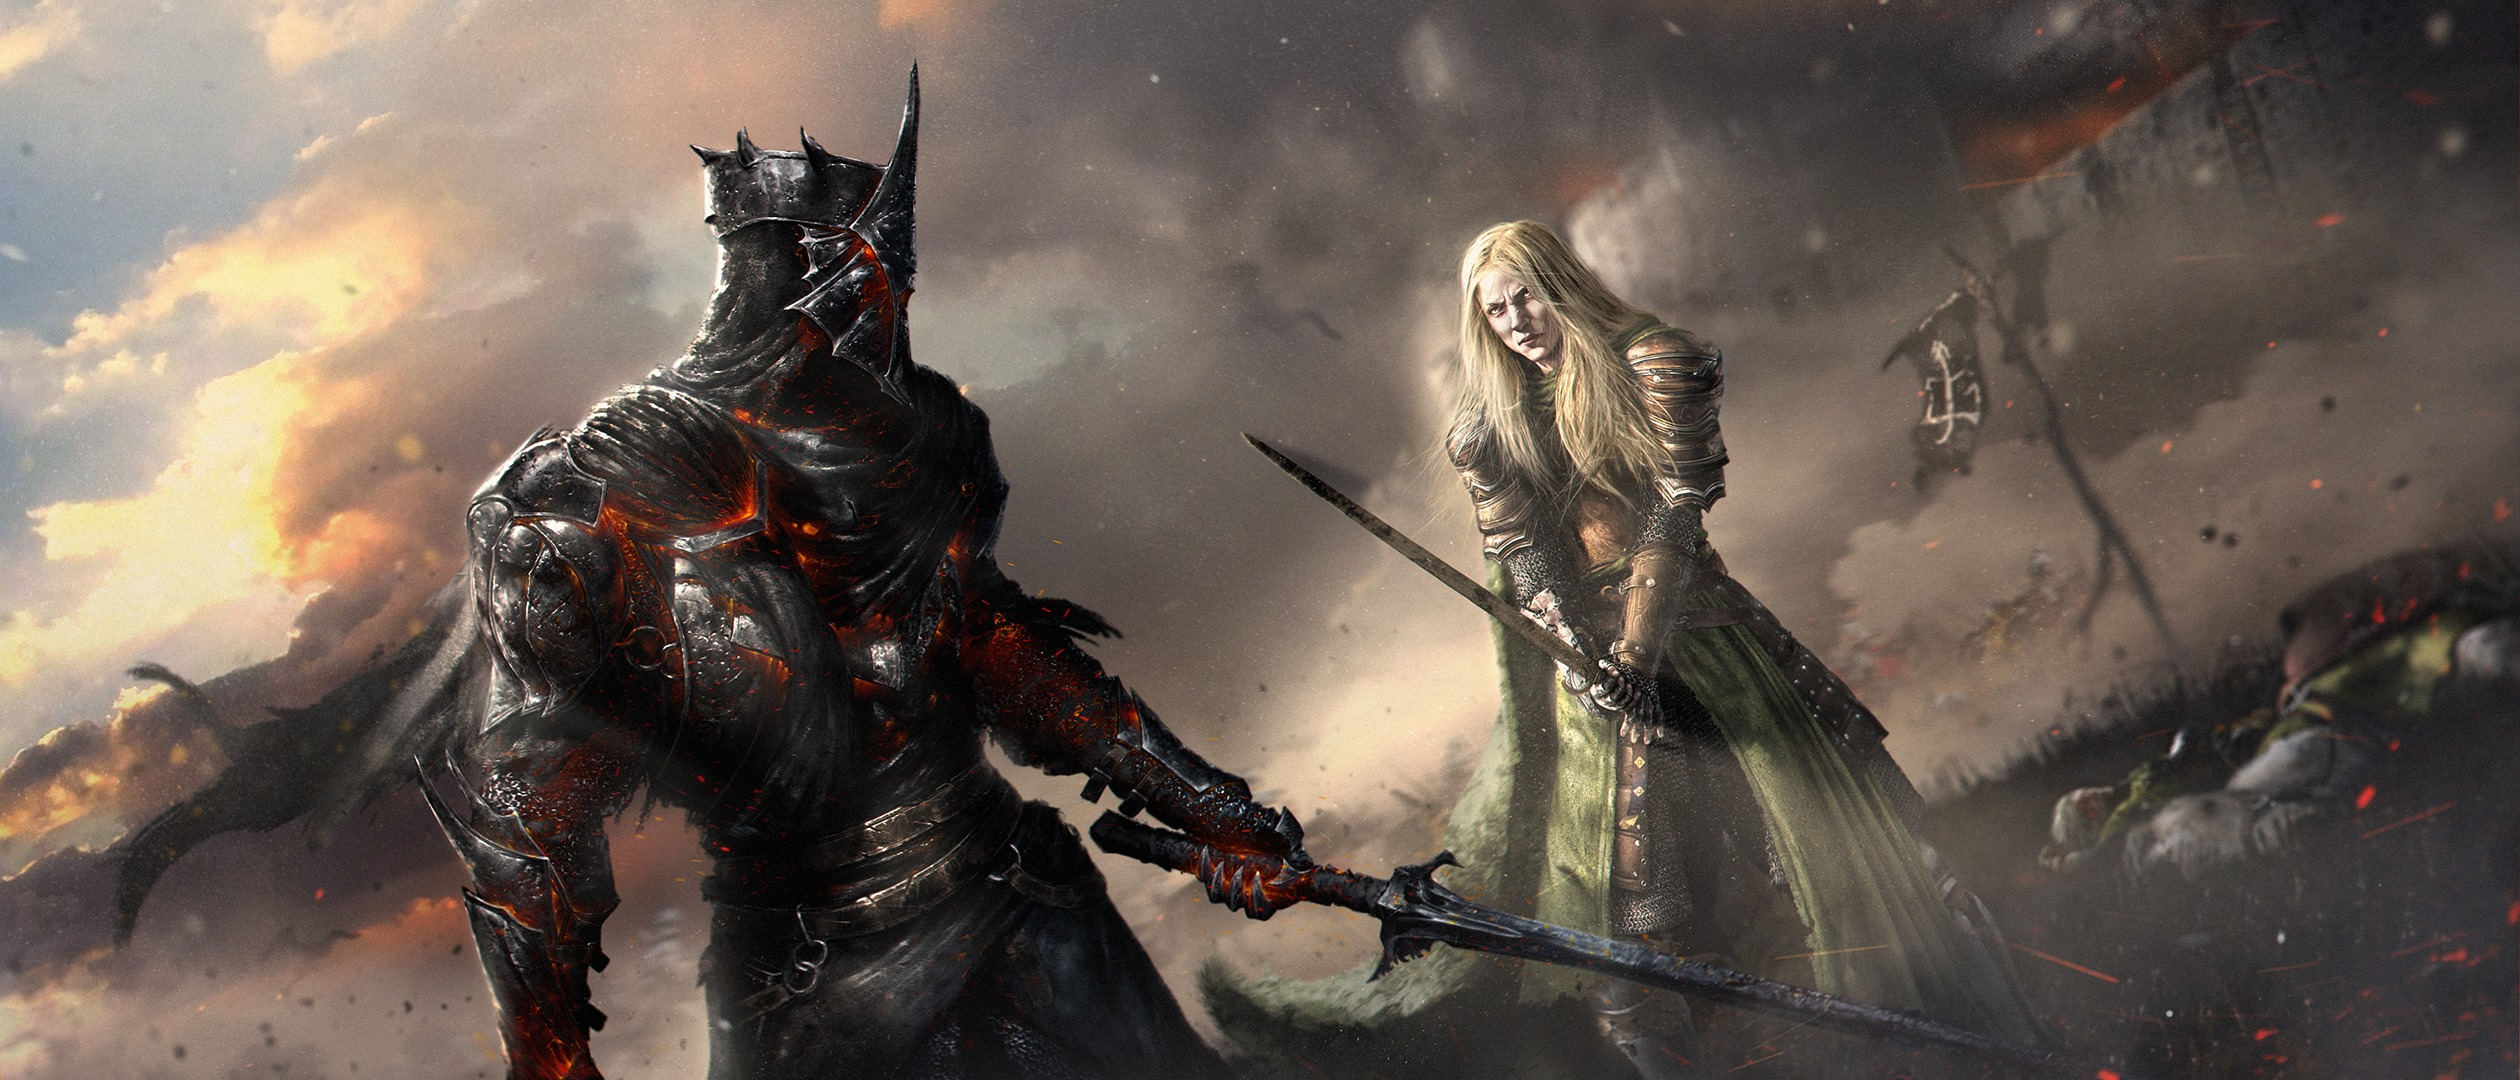 Found this wallpaper online, can somebody tell me if these are Witch King of Angmar and Eowyn?: lotrmemes